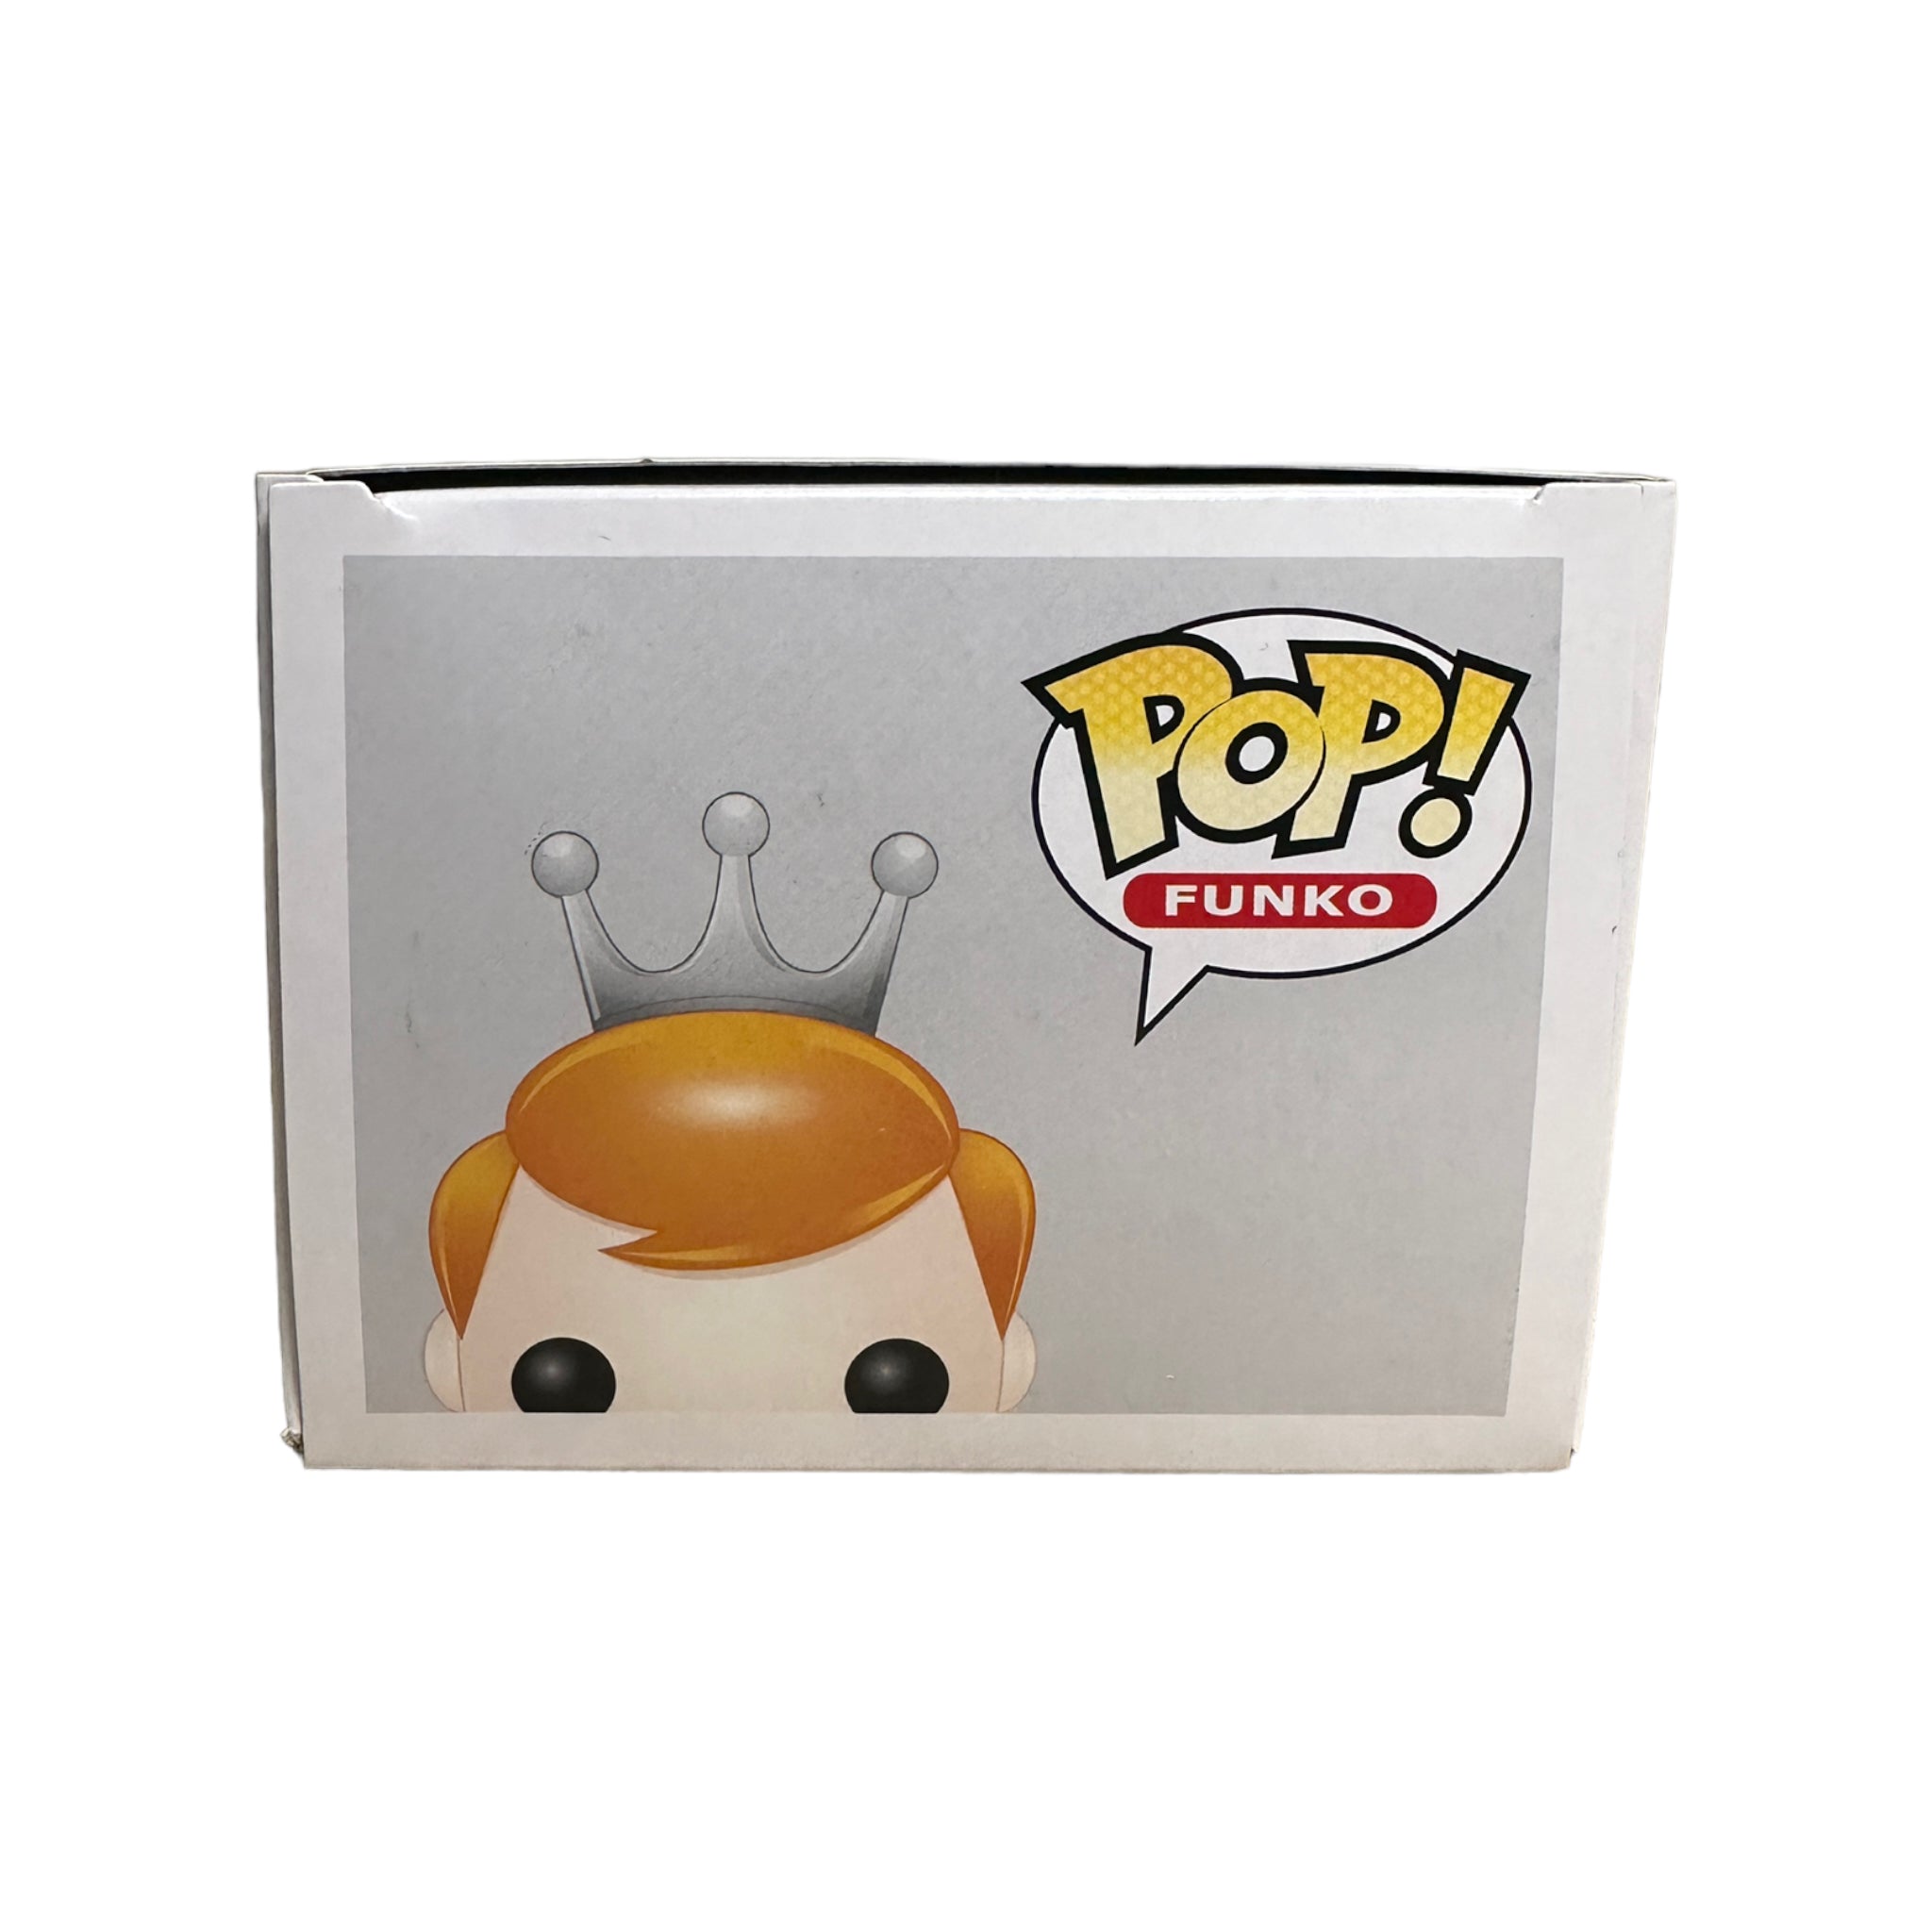 Freddy Funko as Stan Lee (Red) #41 Funko Pop! - SDCC 2015 Exclusive LE96 Pcs - Condition 8.5/10